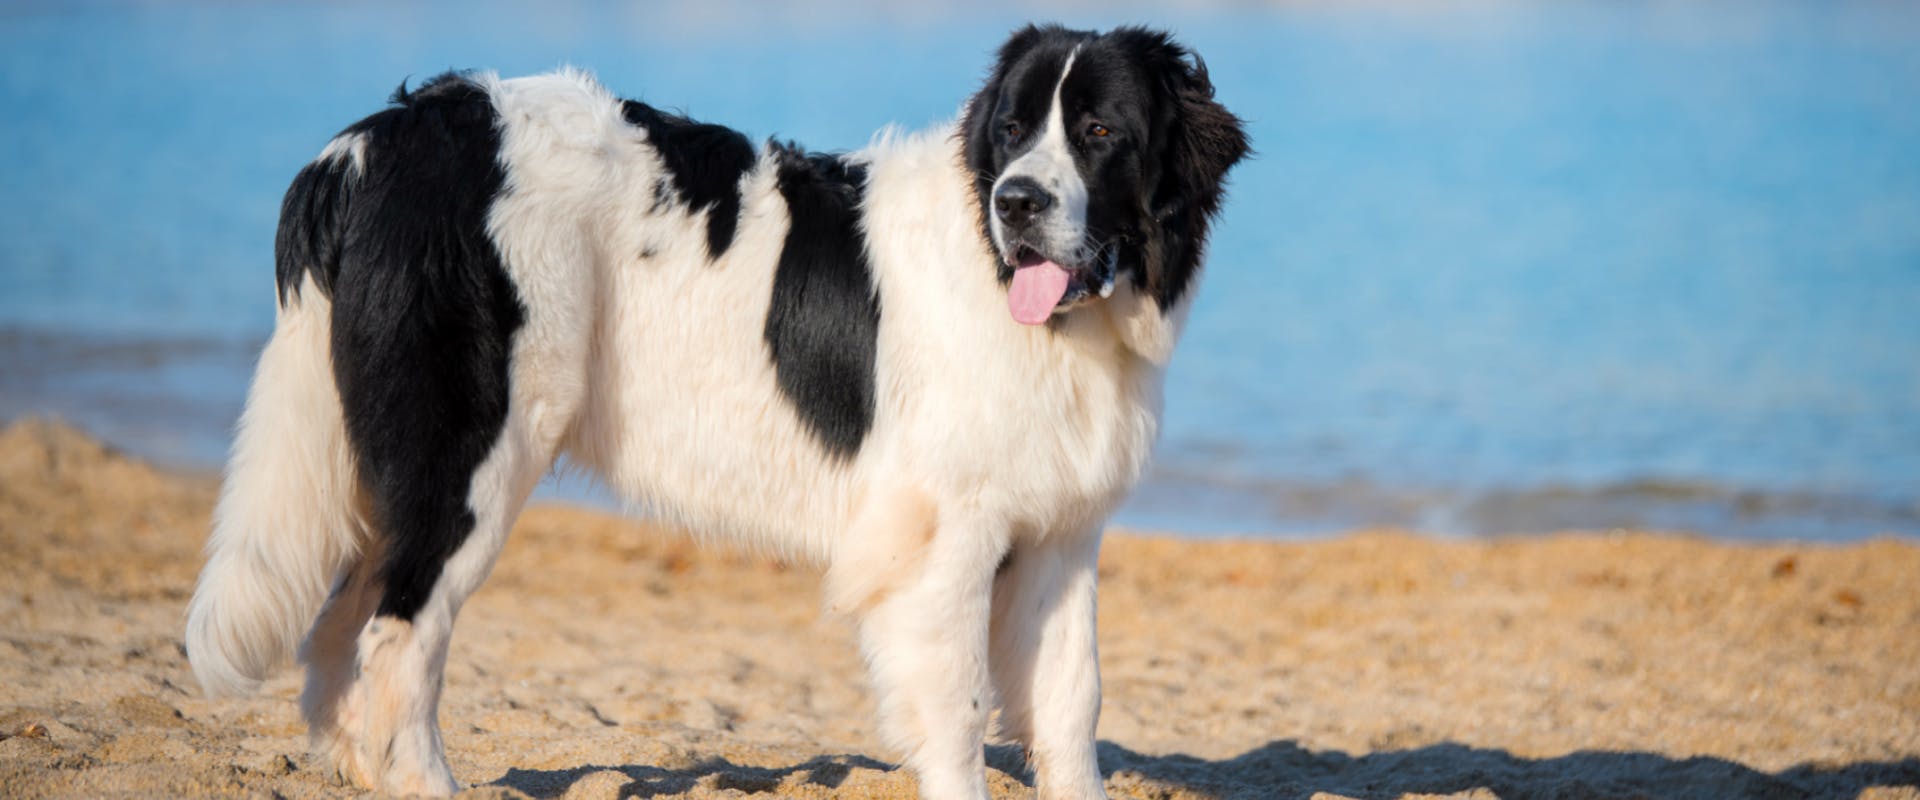 large dog standing on a beach near the shoreline